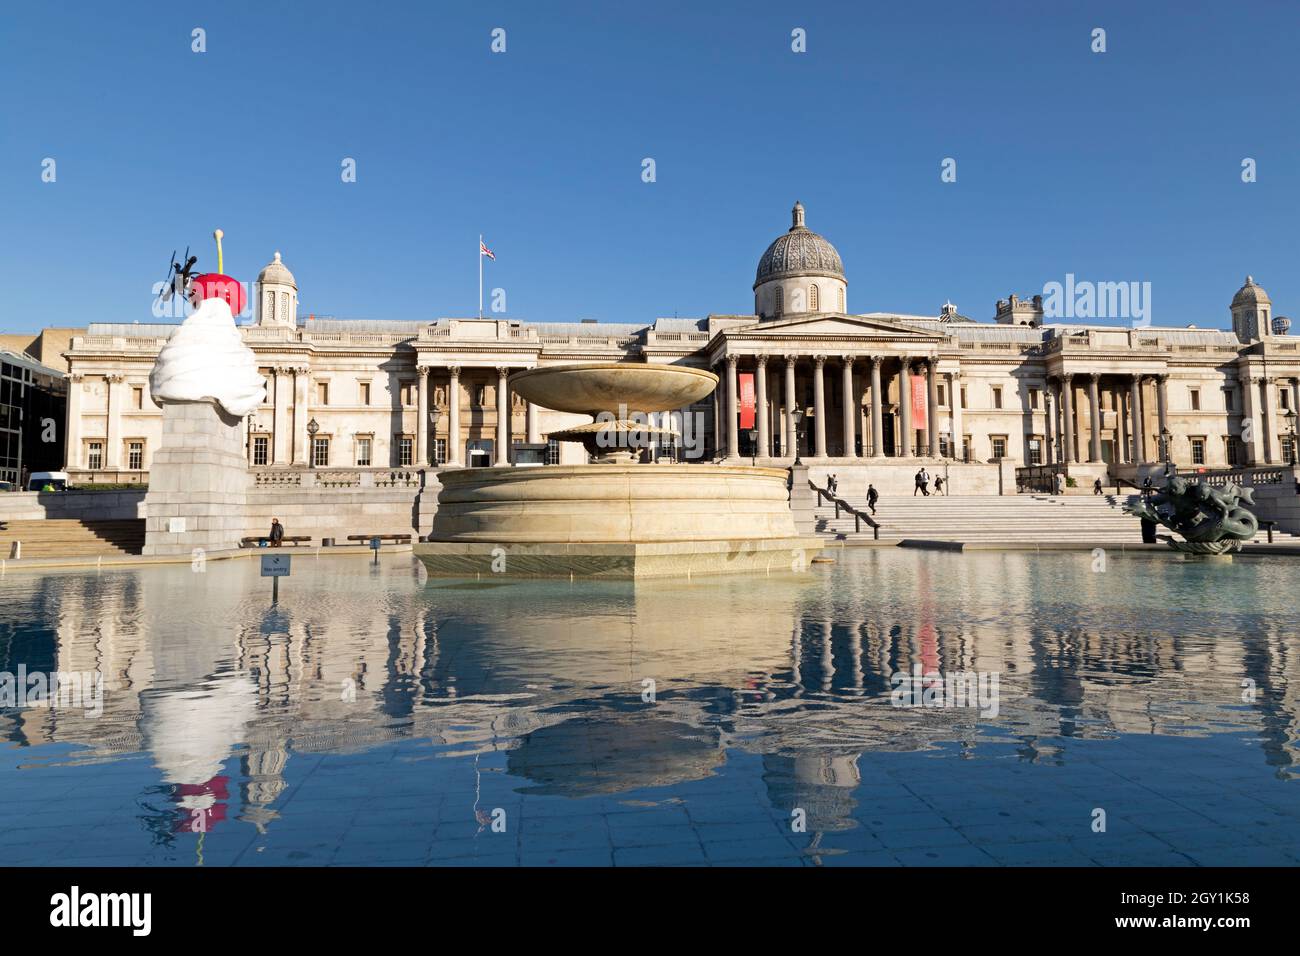 Fountain on Trafalgar Square, in front of the National Gallery, in London, England. William Wilkins designed the Neoclassical building. Stock Photo